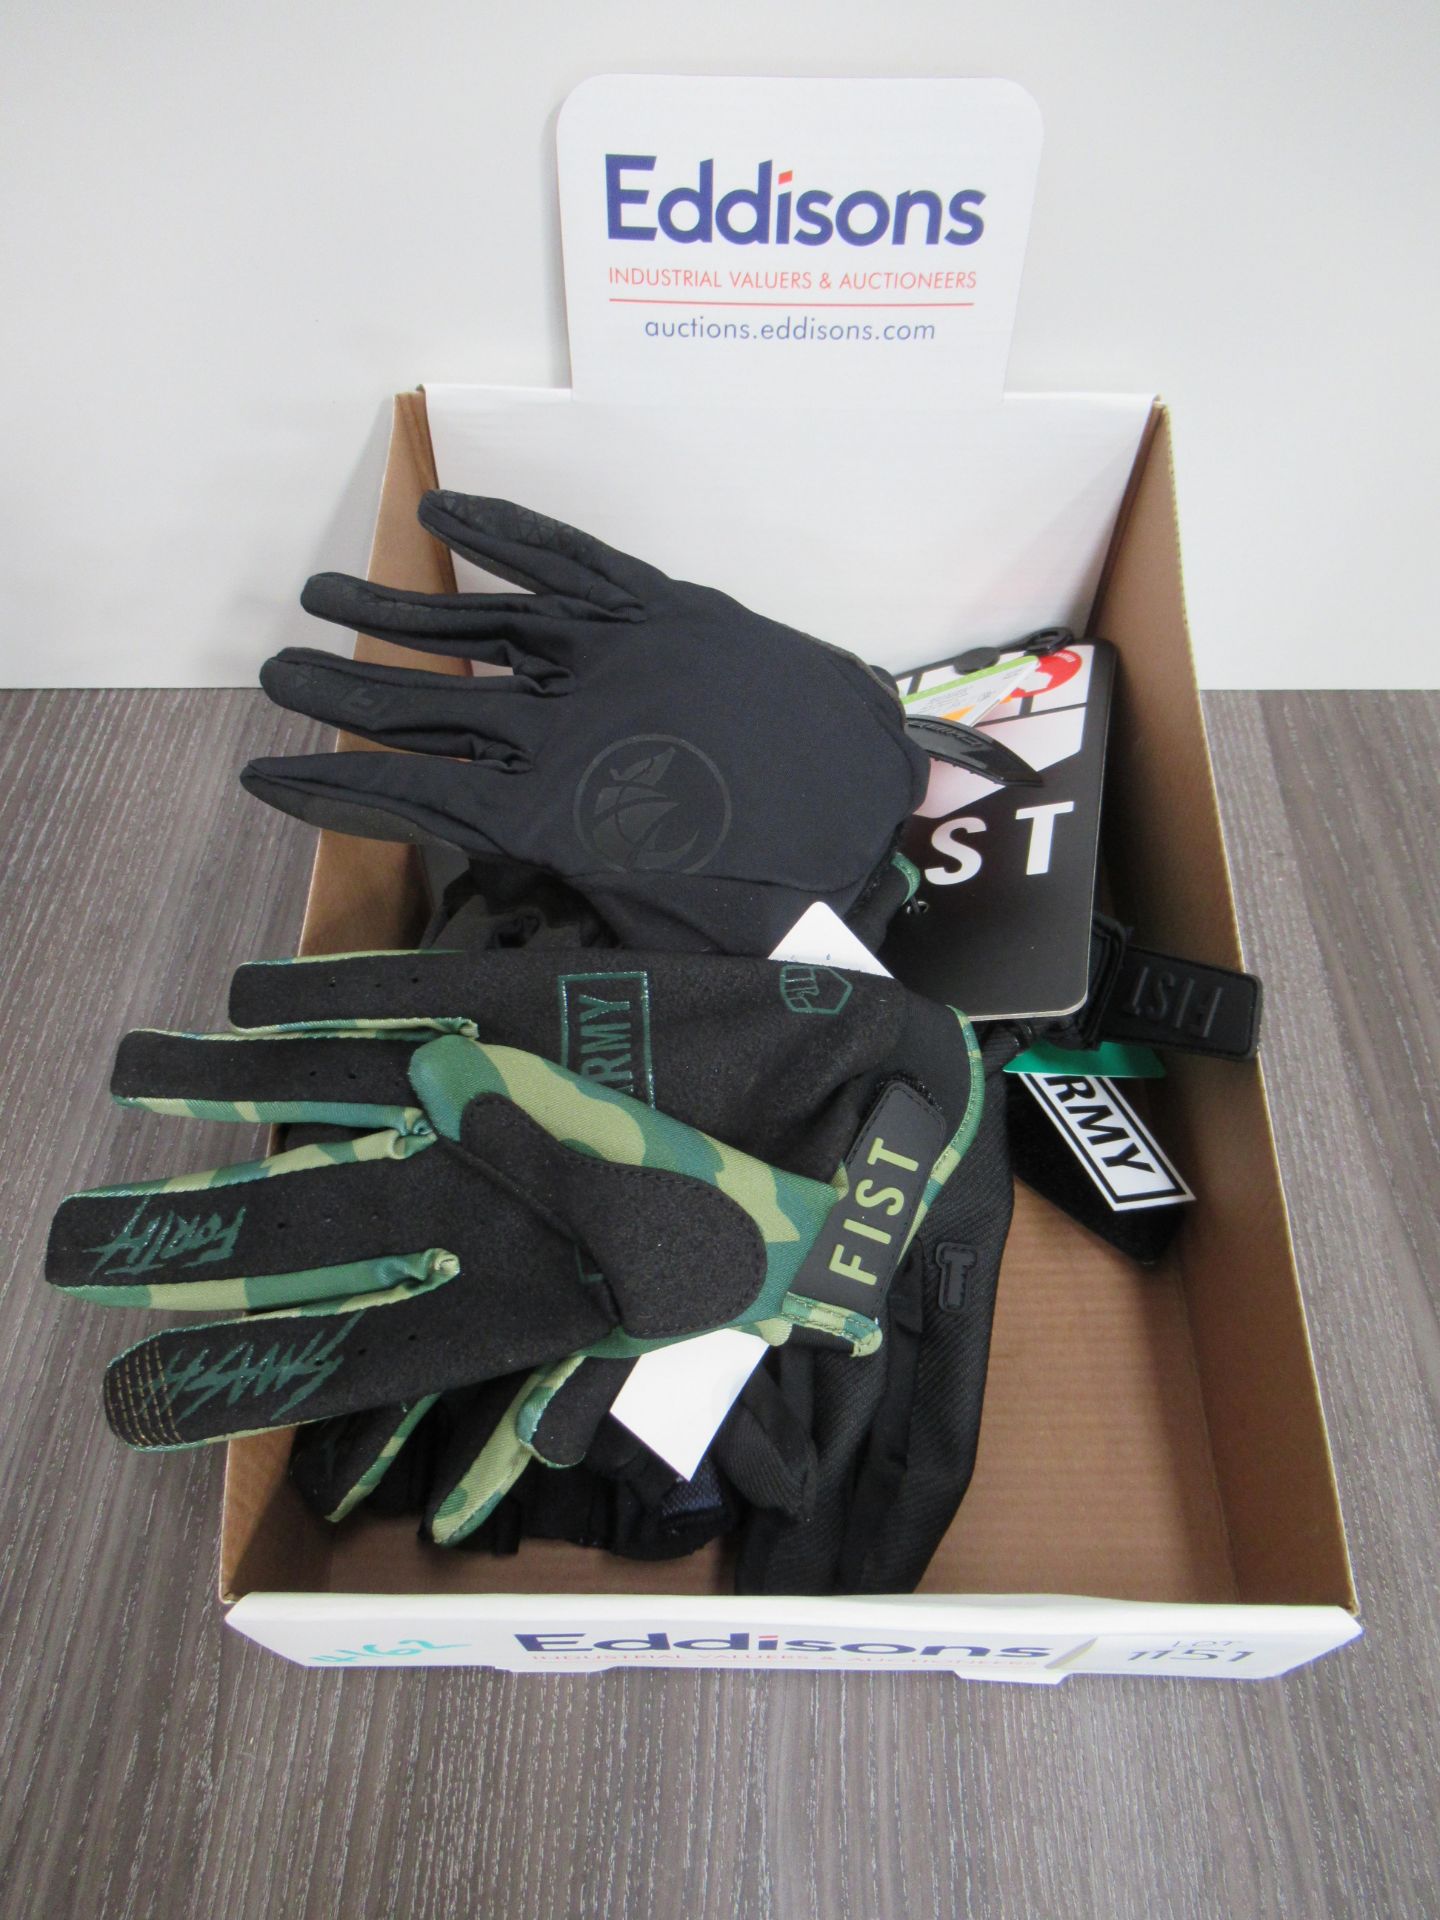 5 x pairs of M sized Gloves - 2 x Madison Flux (RRP£24.99 each); 2 x FIST (RRP£32.99 each) and 1 x C